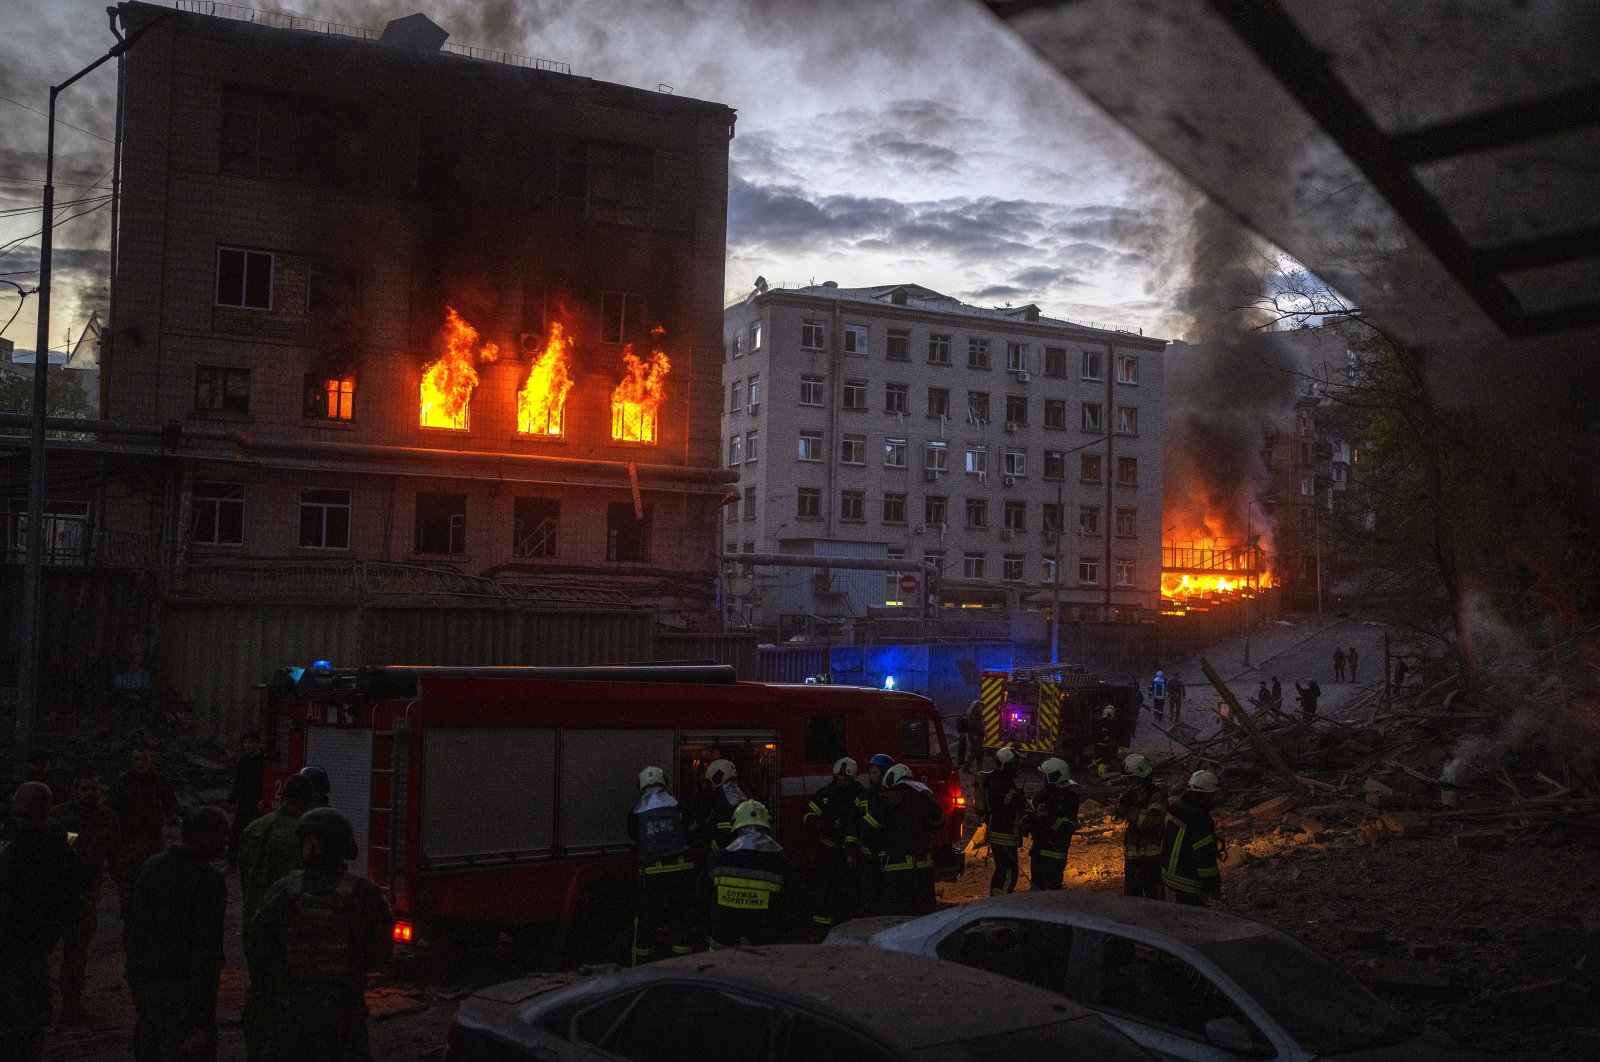 Emergency services work at the site where fires were triggered by an explosion in Kyiv, Ukraine, Thursday, April 28, 2022. Russia struck the Ukrainian capital of Kyiv shortly after a meeting between President Volodymyr Zelenskyy and U.N. Secretary-General António Guterres on Thursday evening. (AP Photo)